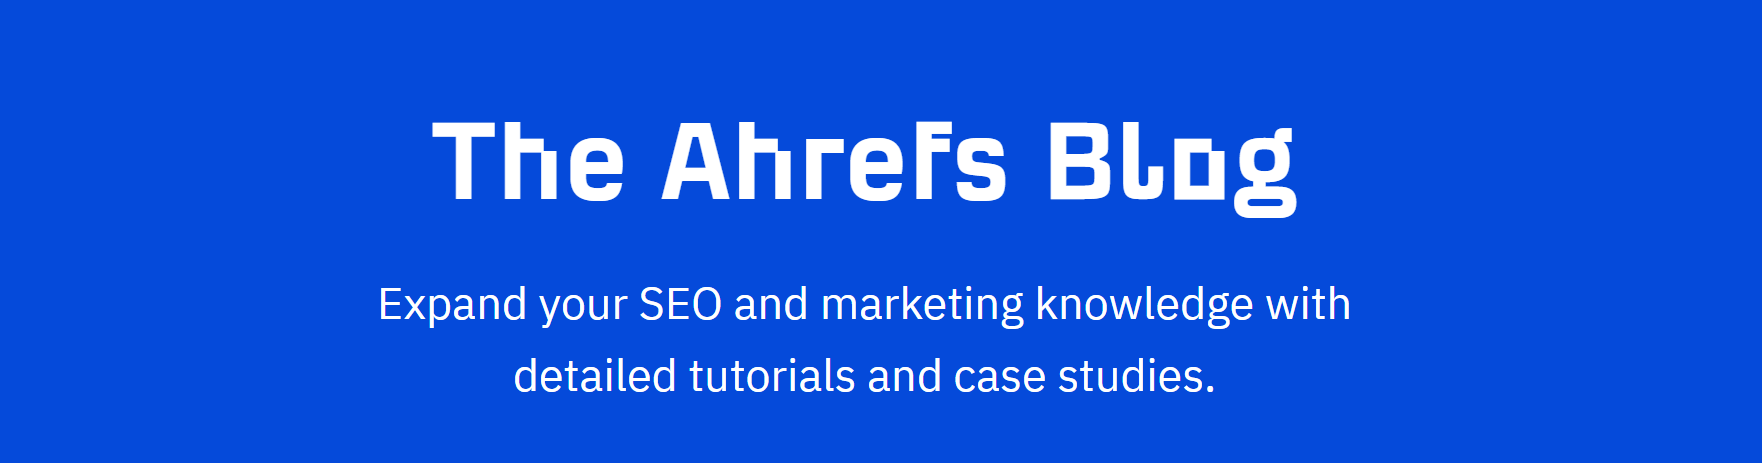 The Ahrefs Blog is among the top 10 SEO blogs to learn SEO from.